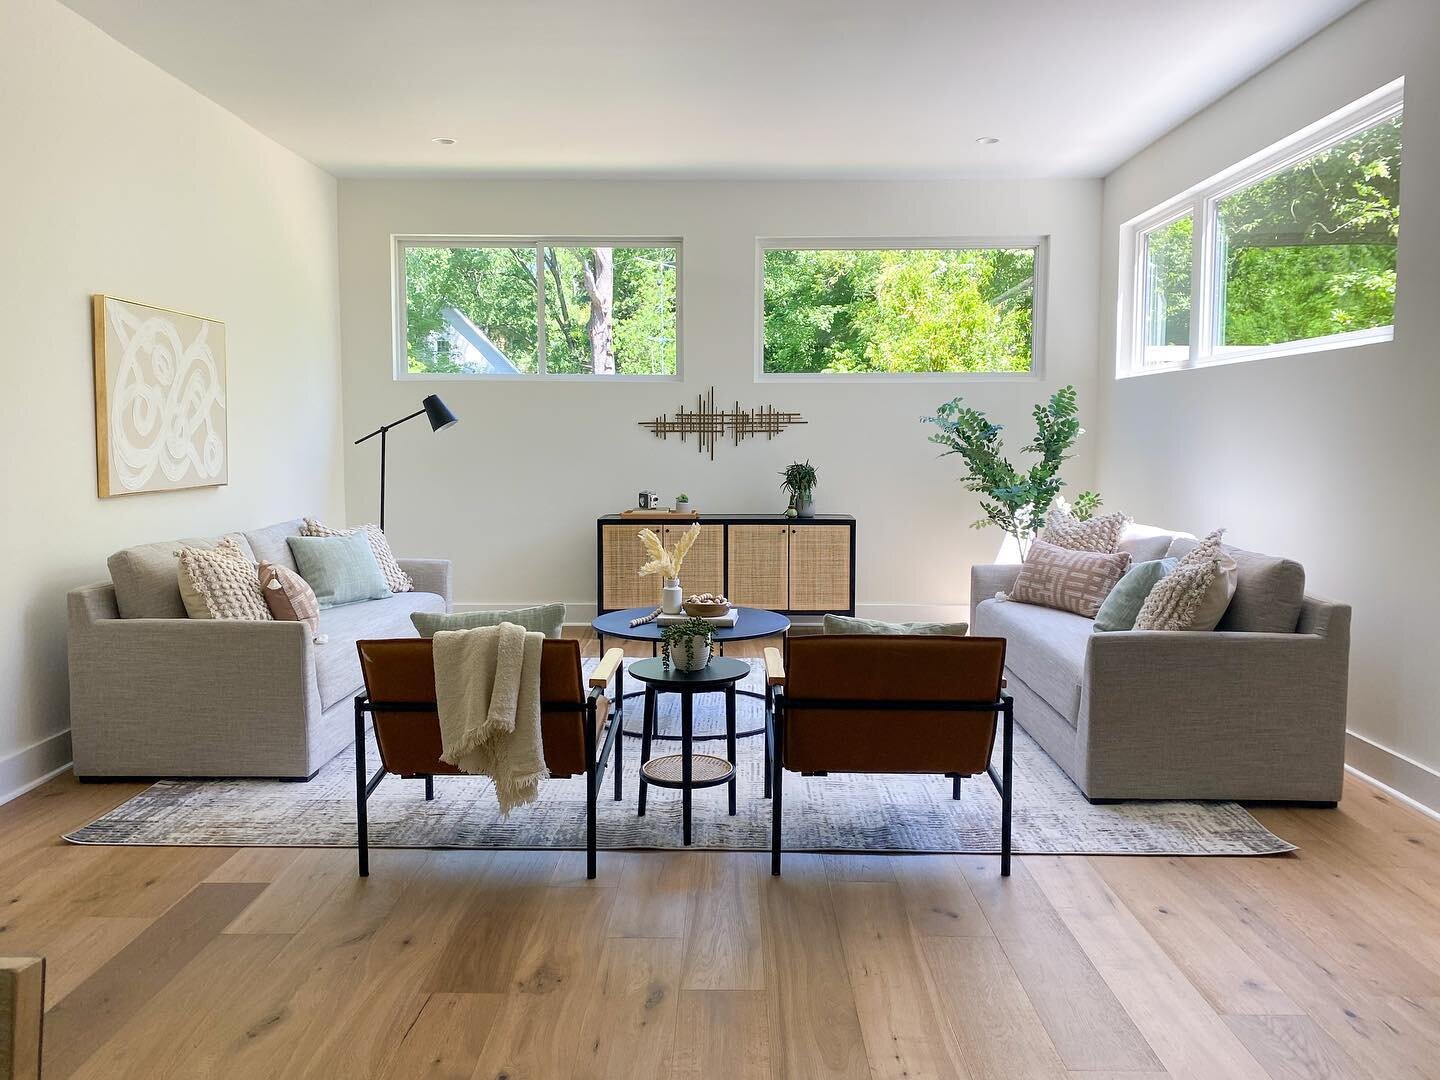 WOWZA! This modern new construction in Carrboro is an absolute stunner! Custom windows, floating stairs, and all around extremely livable. 
It was such a pleasure making this open concept feel homey and inviting. 

Agent: @tomwiltberger